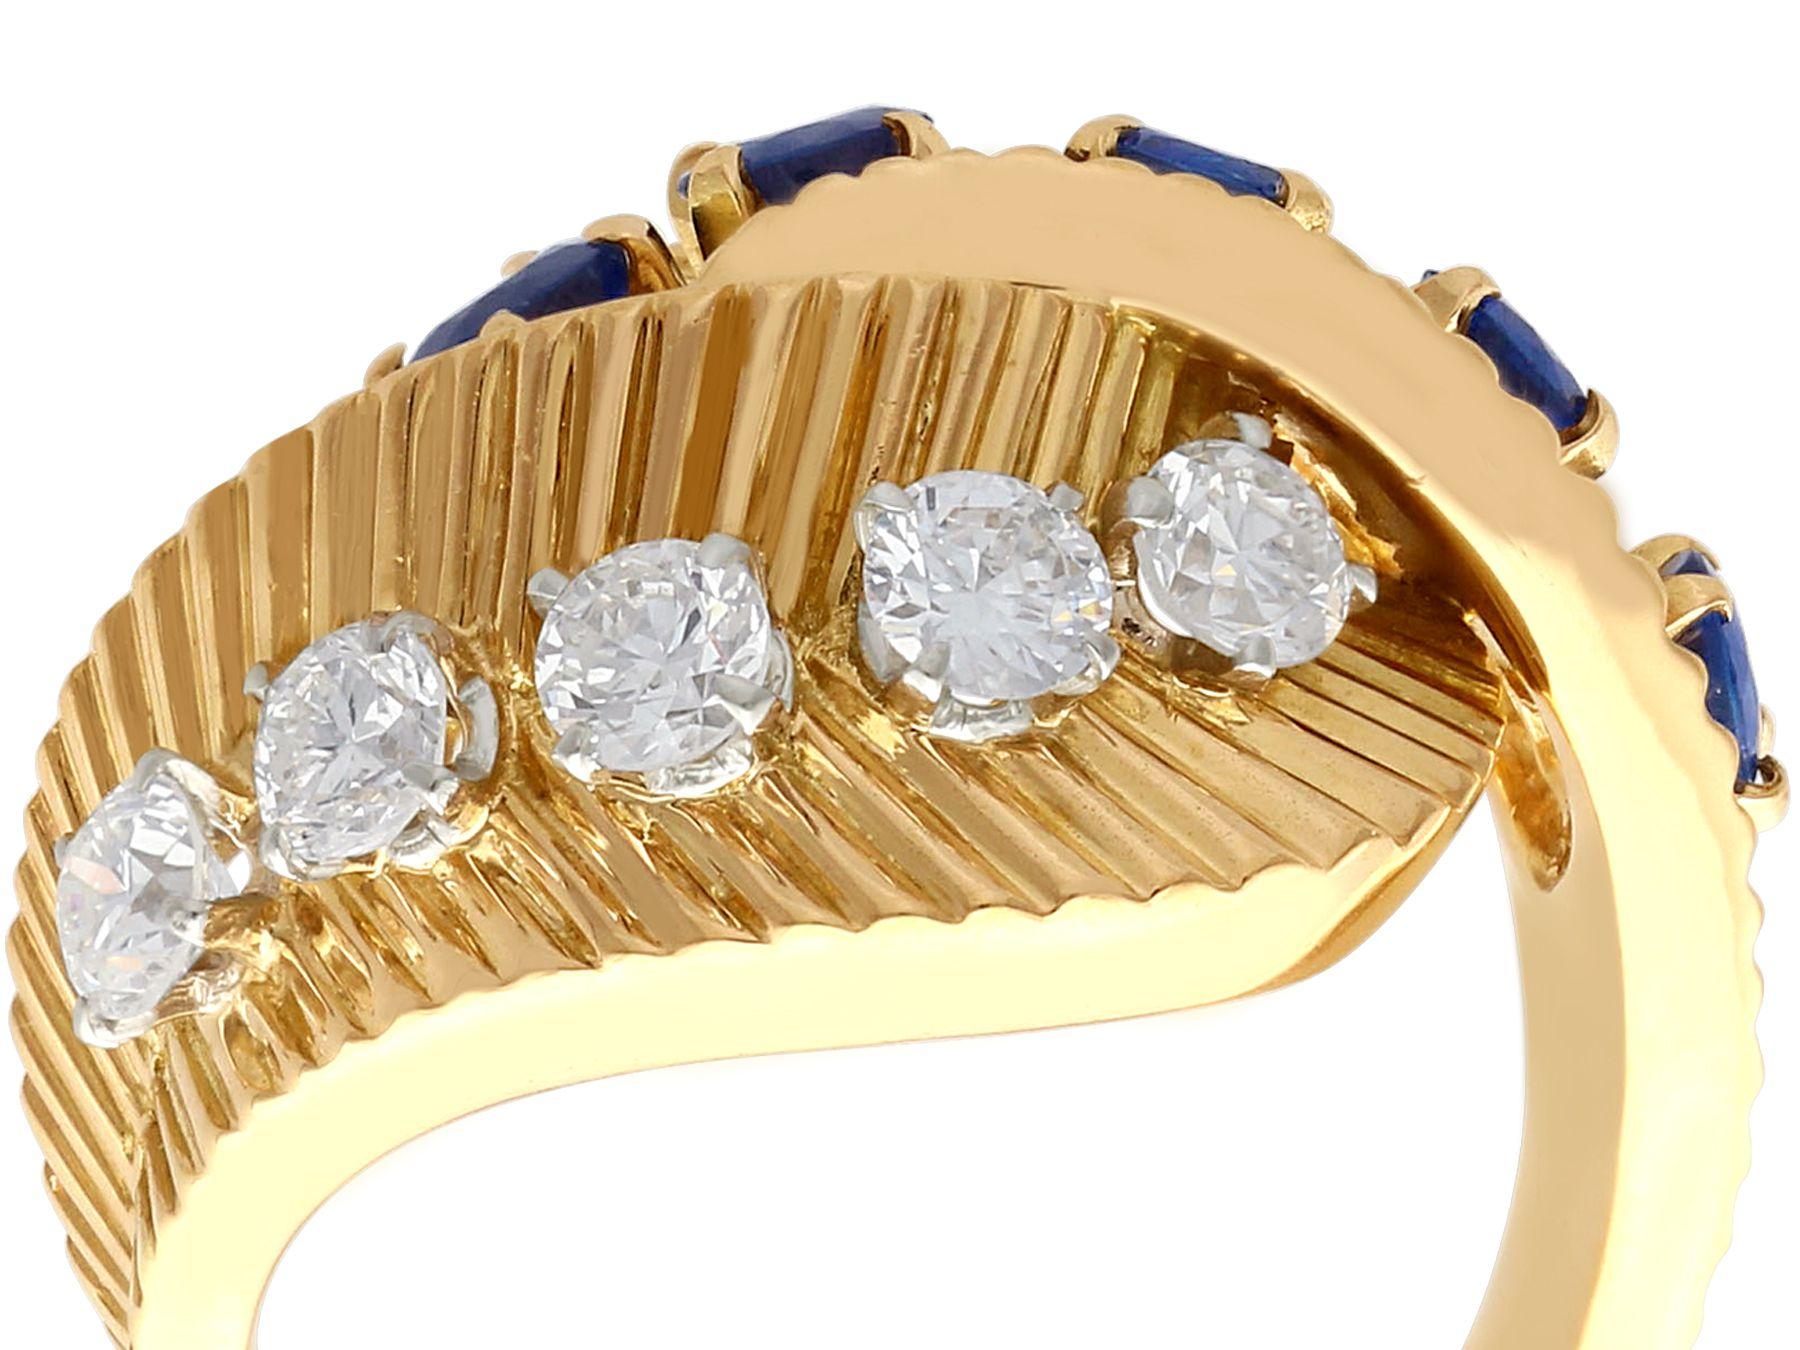 A stunning, fine and impressive vintage 0.69 carat sapphire and 0.55 carat diamond, 18 karat yellow gold cocktail ring made by Van Cleef and Arpels; part of our diverse antique jewelry and estate jewelry collections.

This stunning, fine and